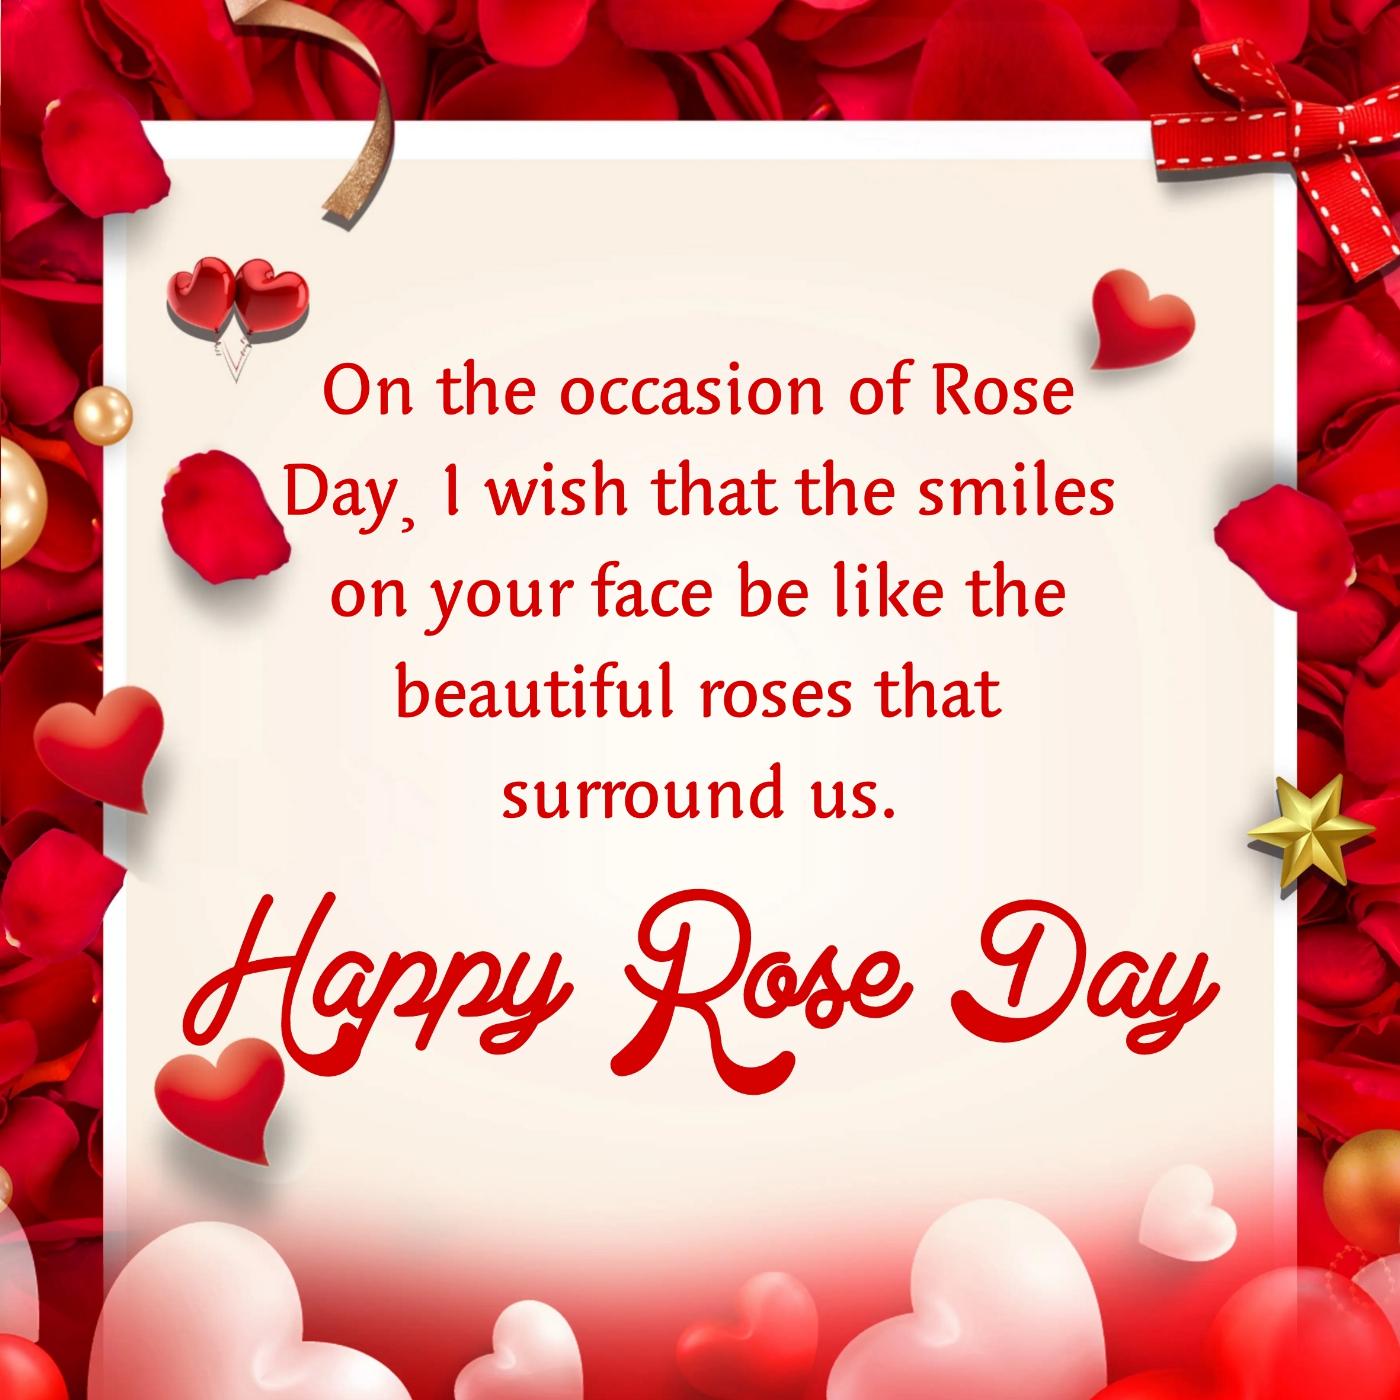 On the occasion of Rose Day¸ I wish that the smiles